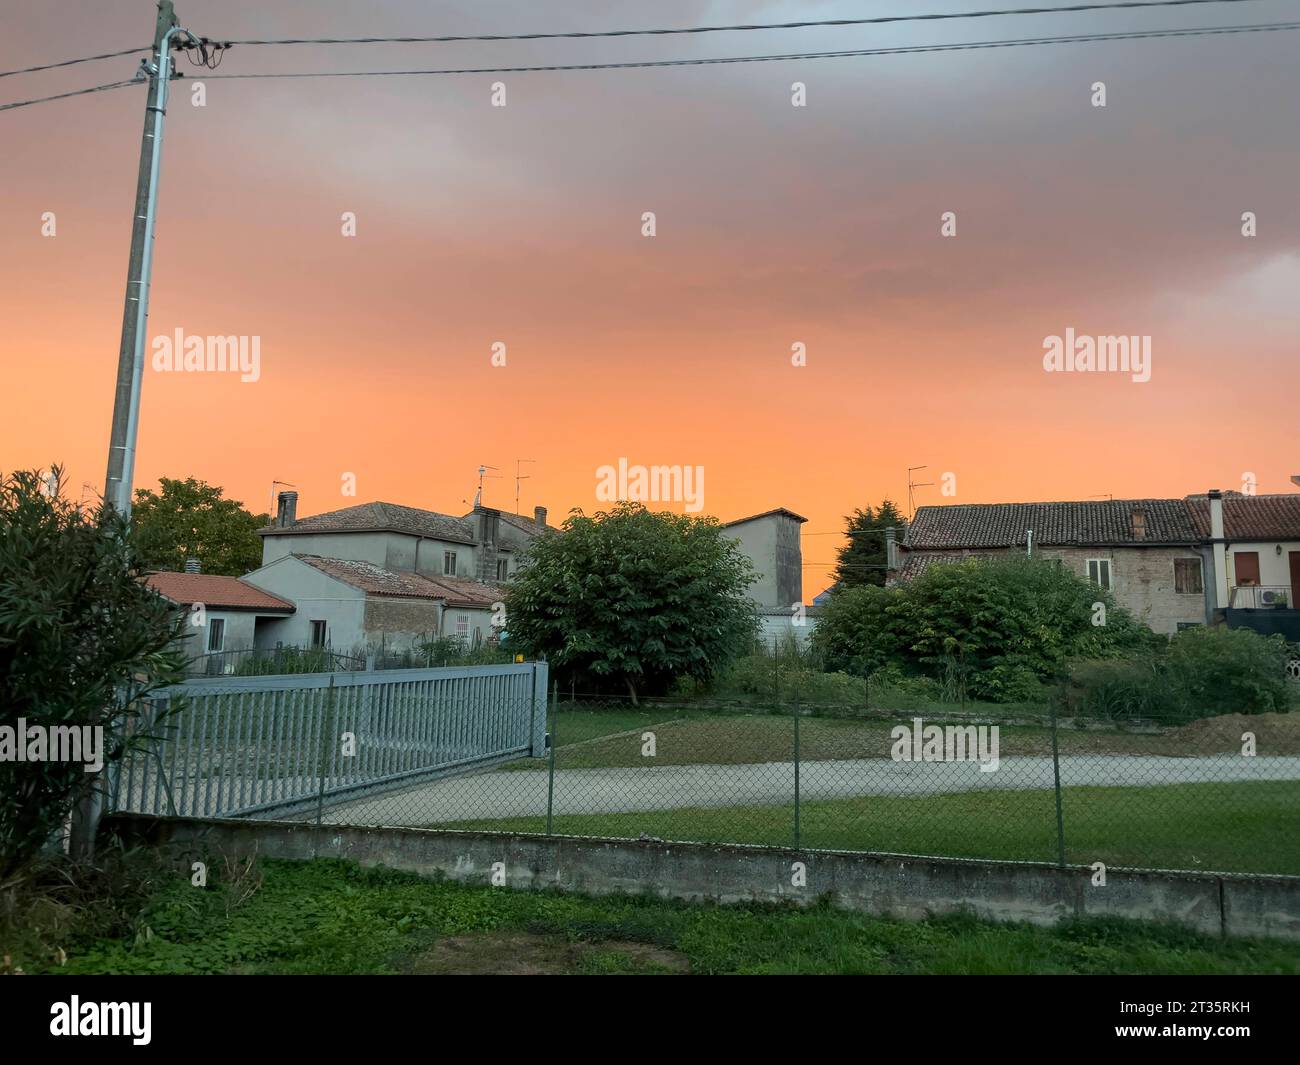 Golden hues of sunset filter through the silhouette of urban houses, casting a serene ambiance. Sunset Amidst City Homes Copyright: xx IMG 004899 Credit: Imago/Alamy Live News Stock Photo